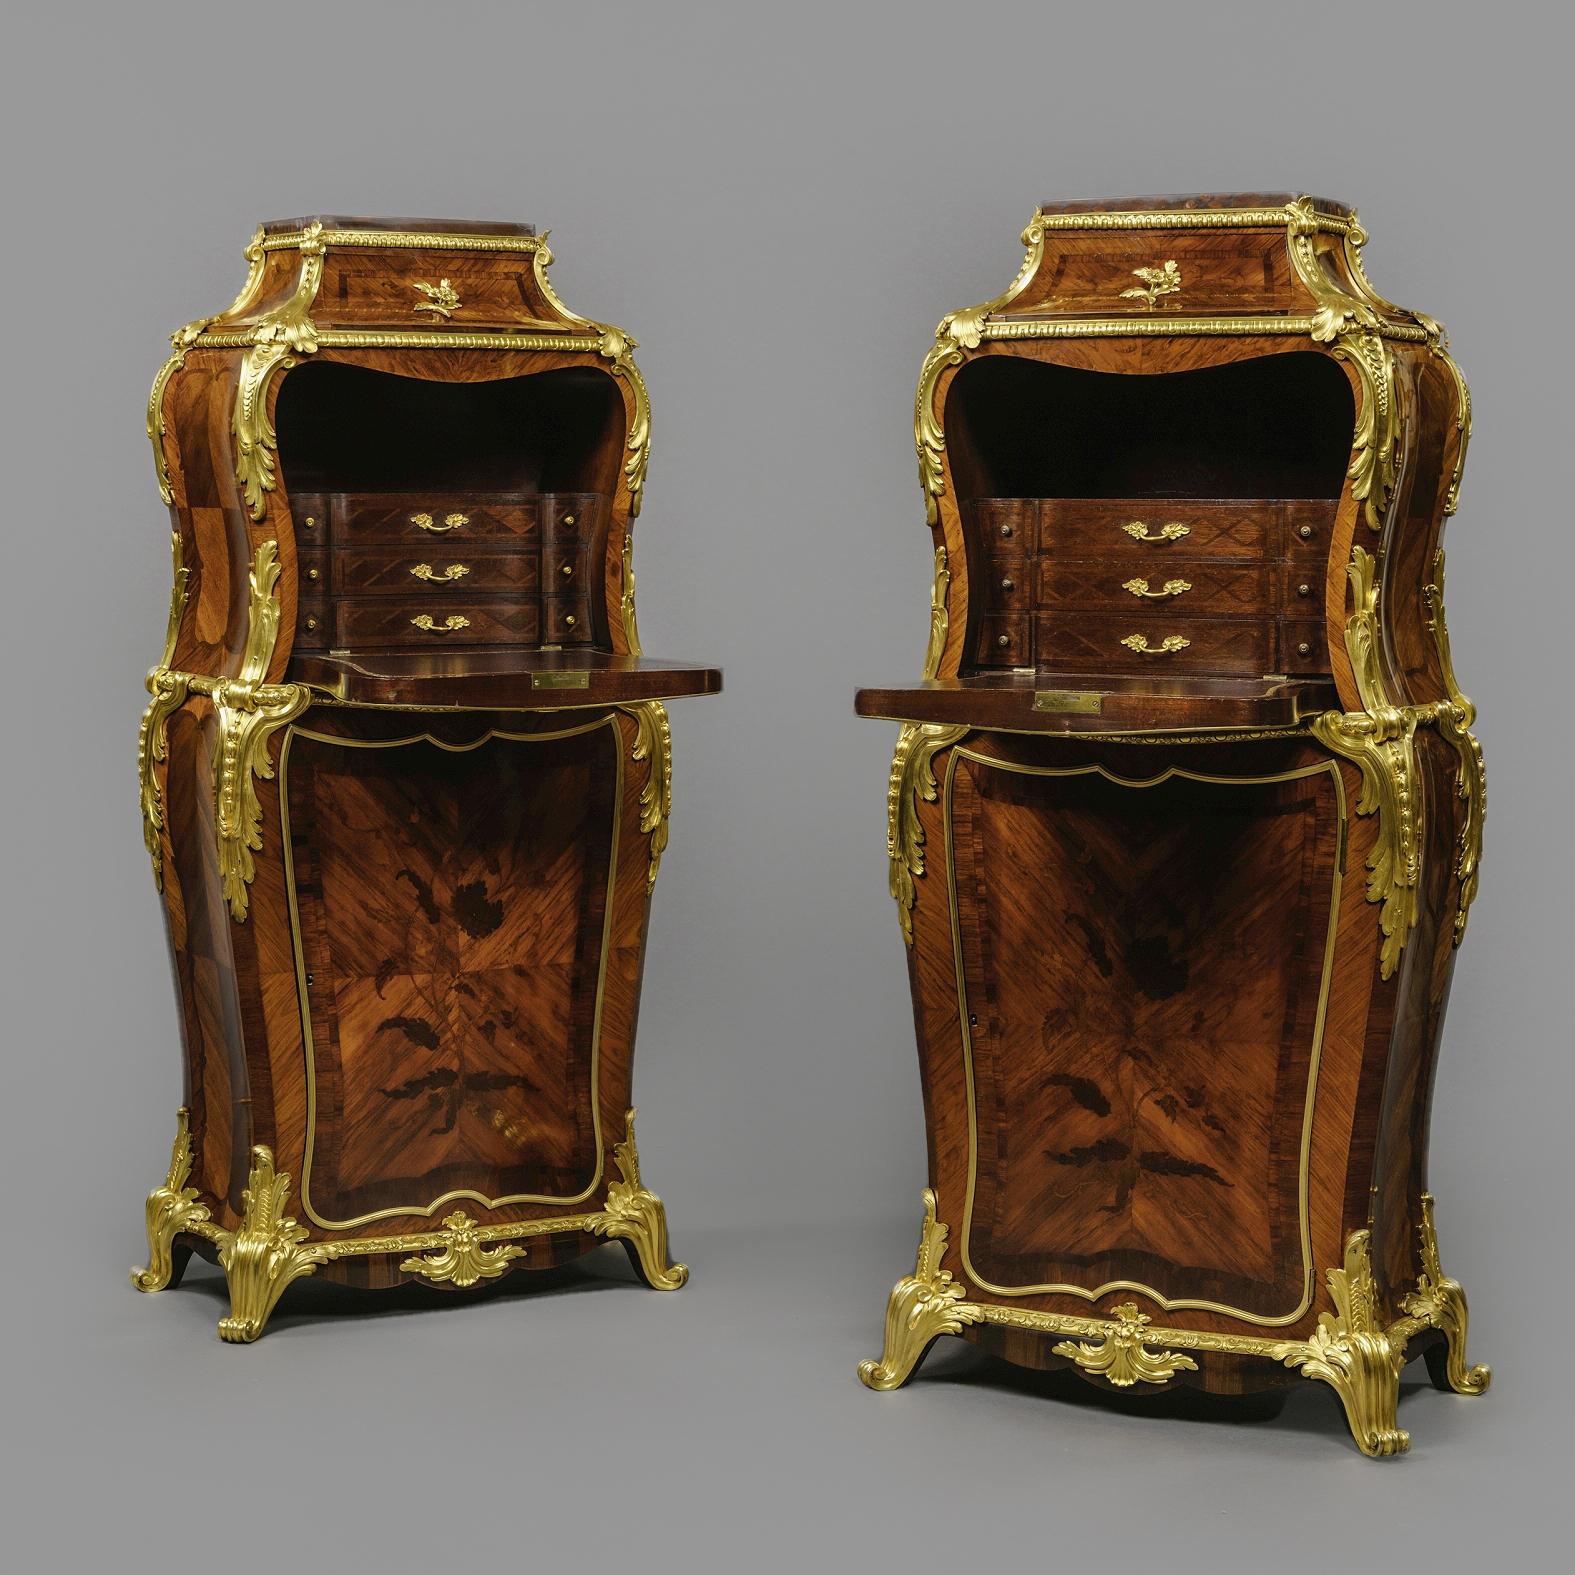 A pair of Napoleon III gilt-bronze mounted, Marquetry Inlaid Secrétaires Abbatants, by Henry Dasson, After the Model by Jean-Francois Dubut. 

Stamped to the reverse of the bronze mounts 'HD' for Henry Dasson. 

This remarkable pair of Louis XV